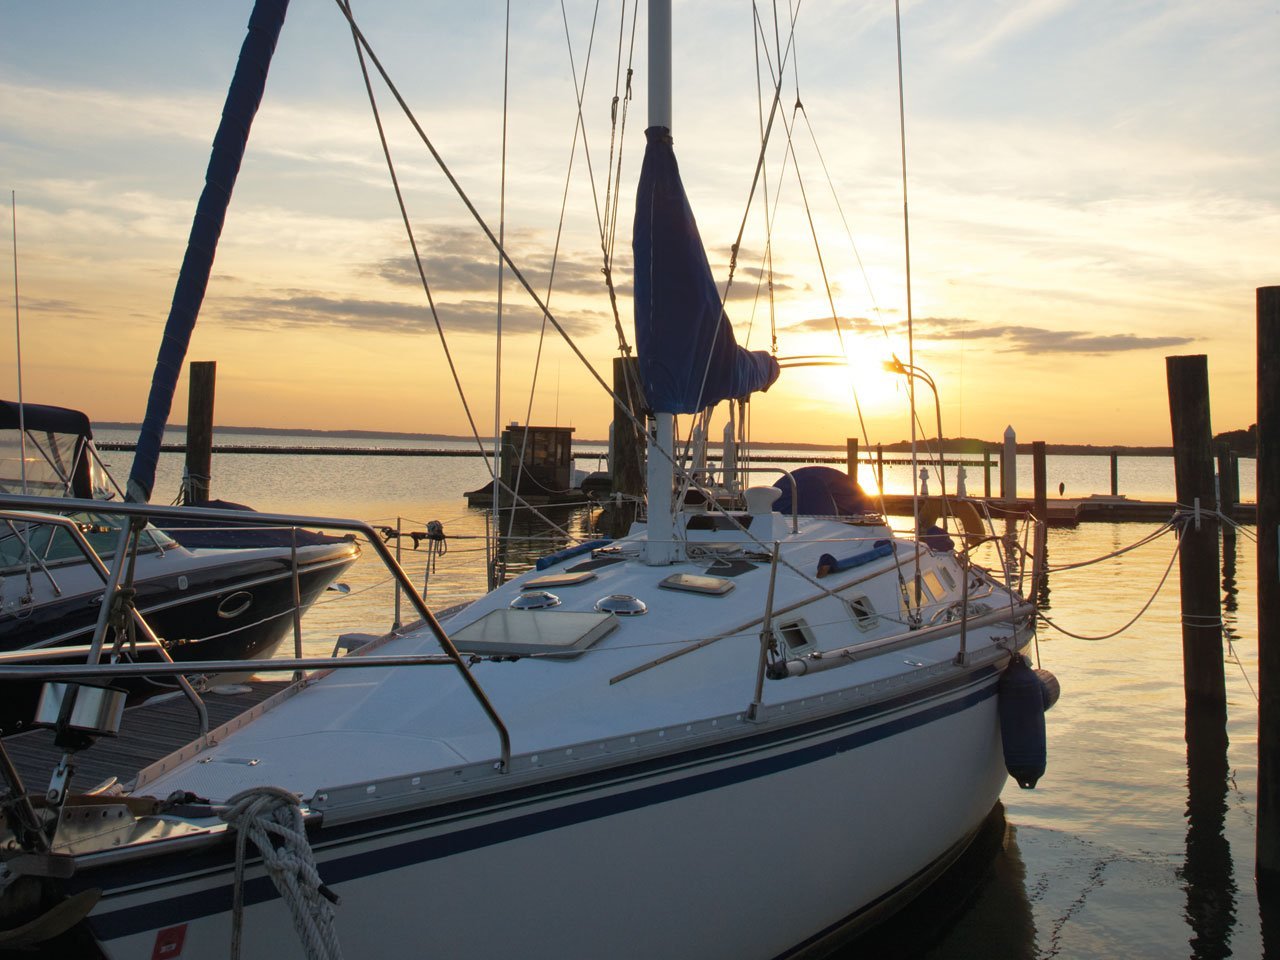 A boat in a marina at sunset